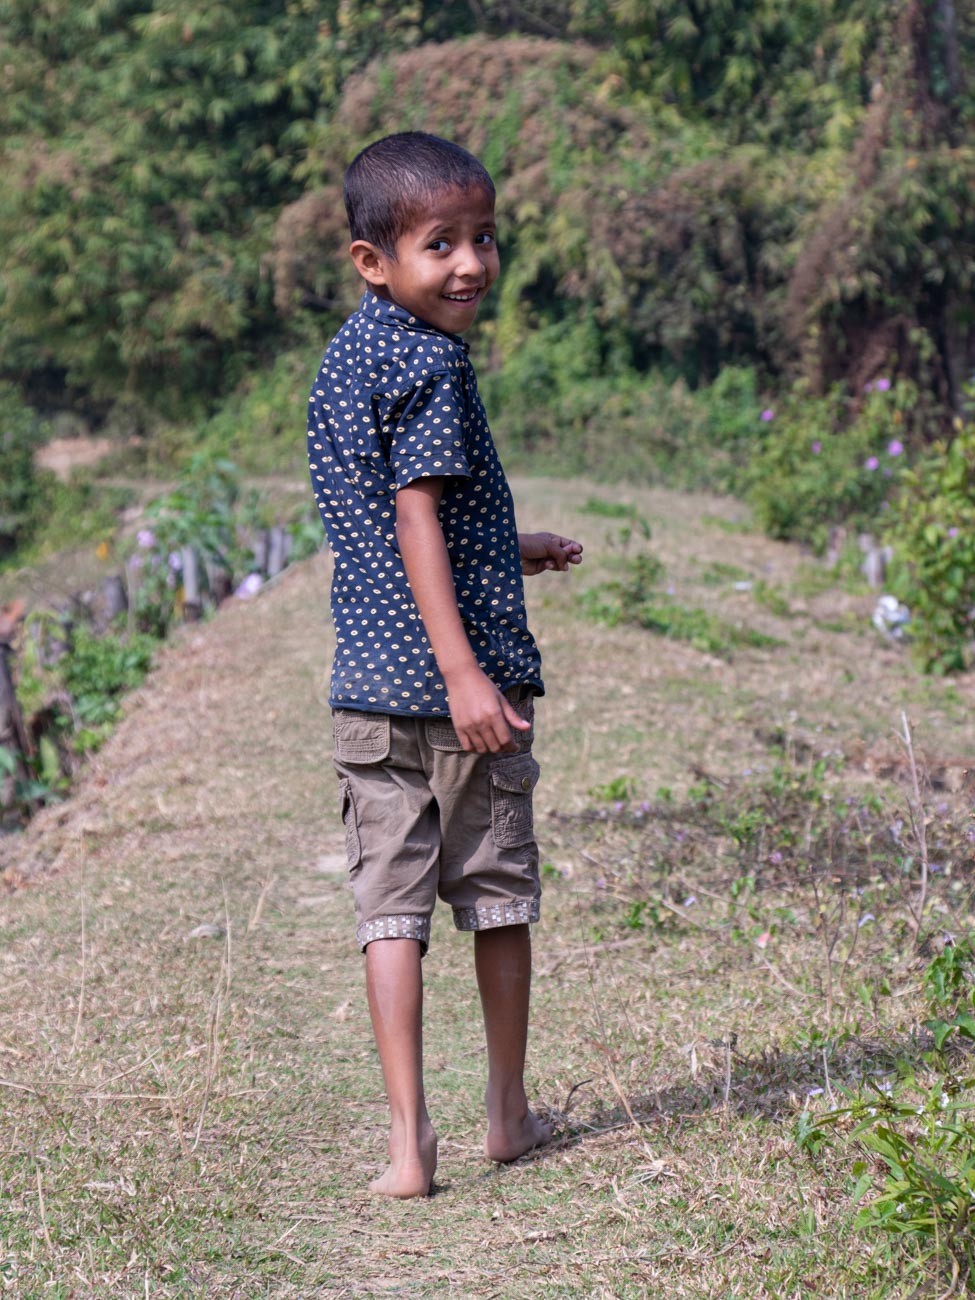 Local boy by the Lalakhal River - Bangladesh